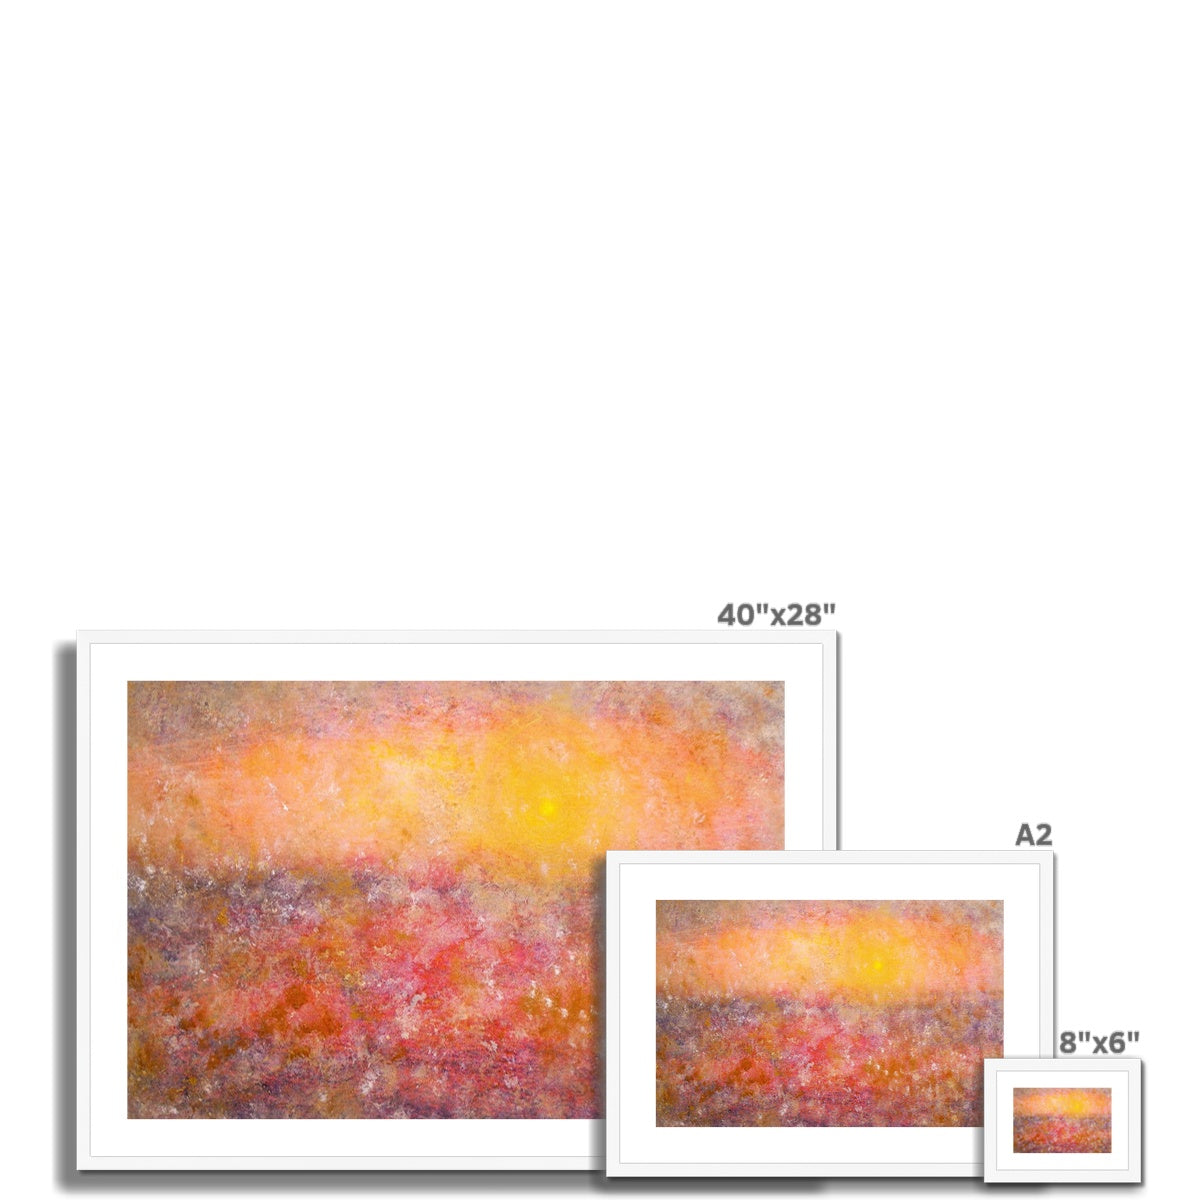 Sunrise Mist Horizon Abstract Painting | Framed & Mounted Prints From Scotland-Framed & Mounted Prints-Abstract & Impressionistic Art Gallery-Paintings, Prints, Homeware, Art Gifts From Scotland By Scottish Artist Kevin Hunter